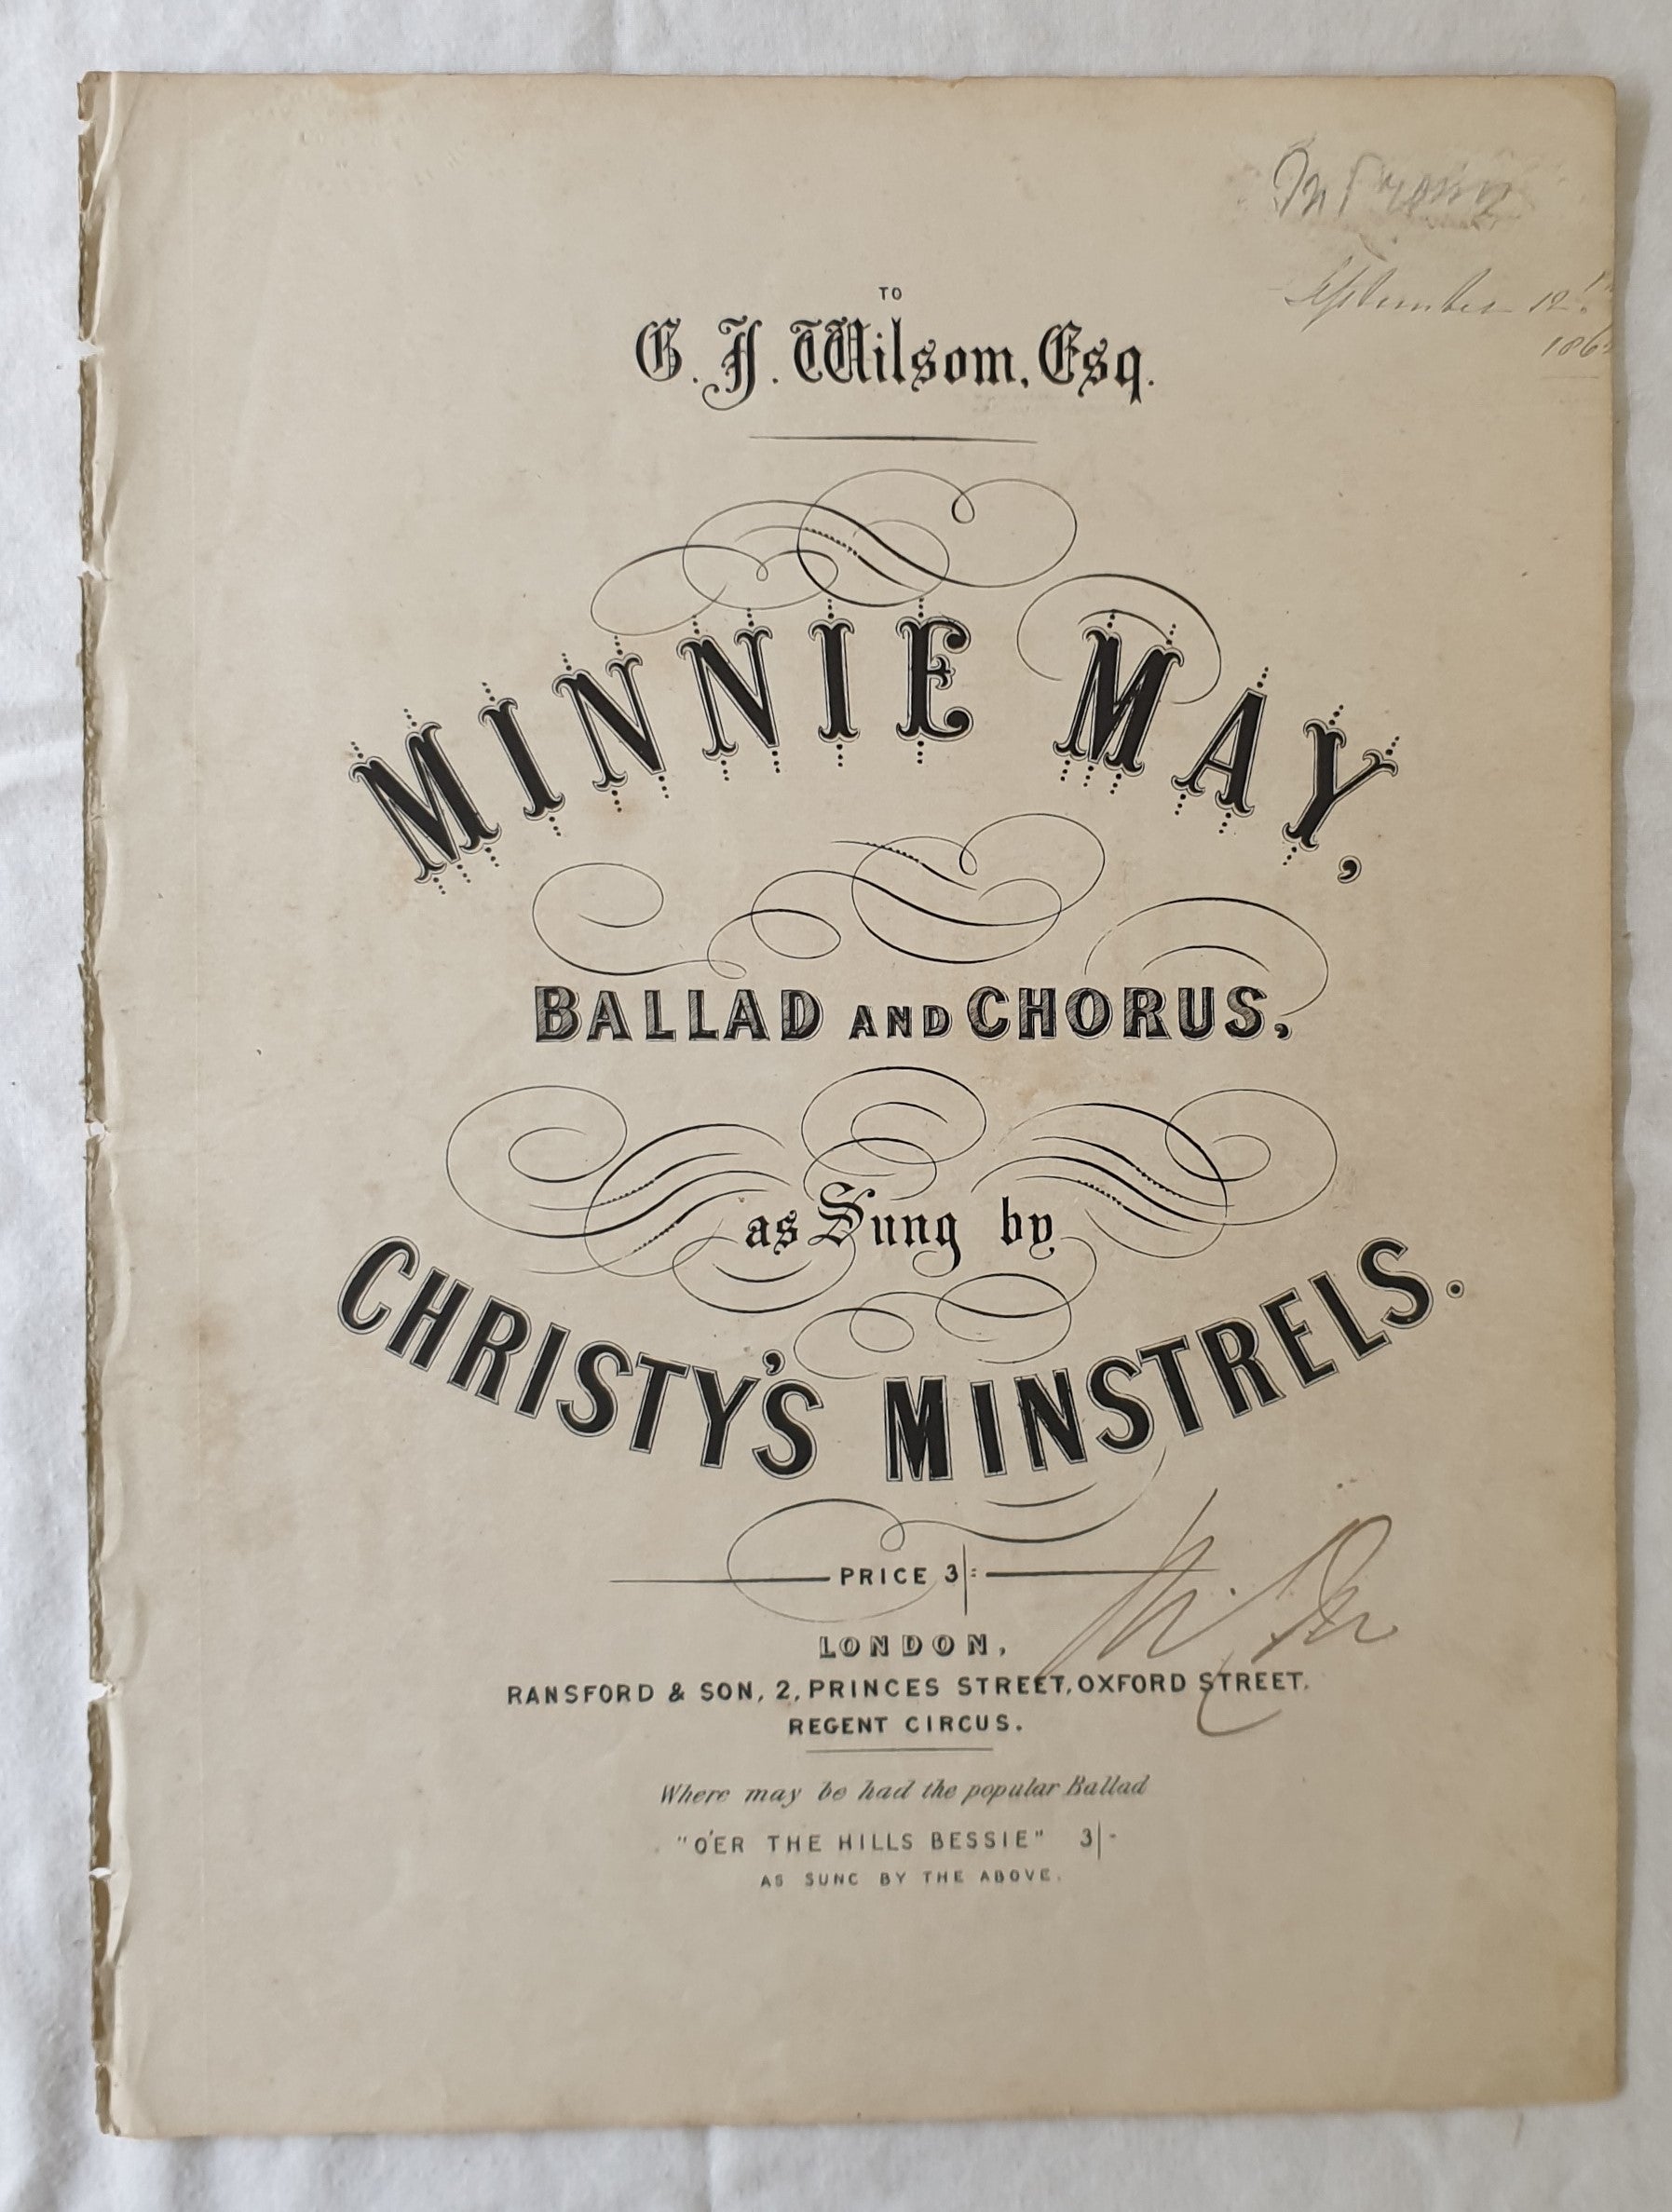 Minnie May  Ballad and Chorus,  As sung by Christy’s Minstrels